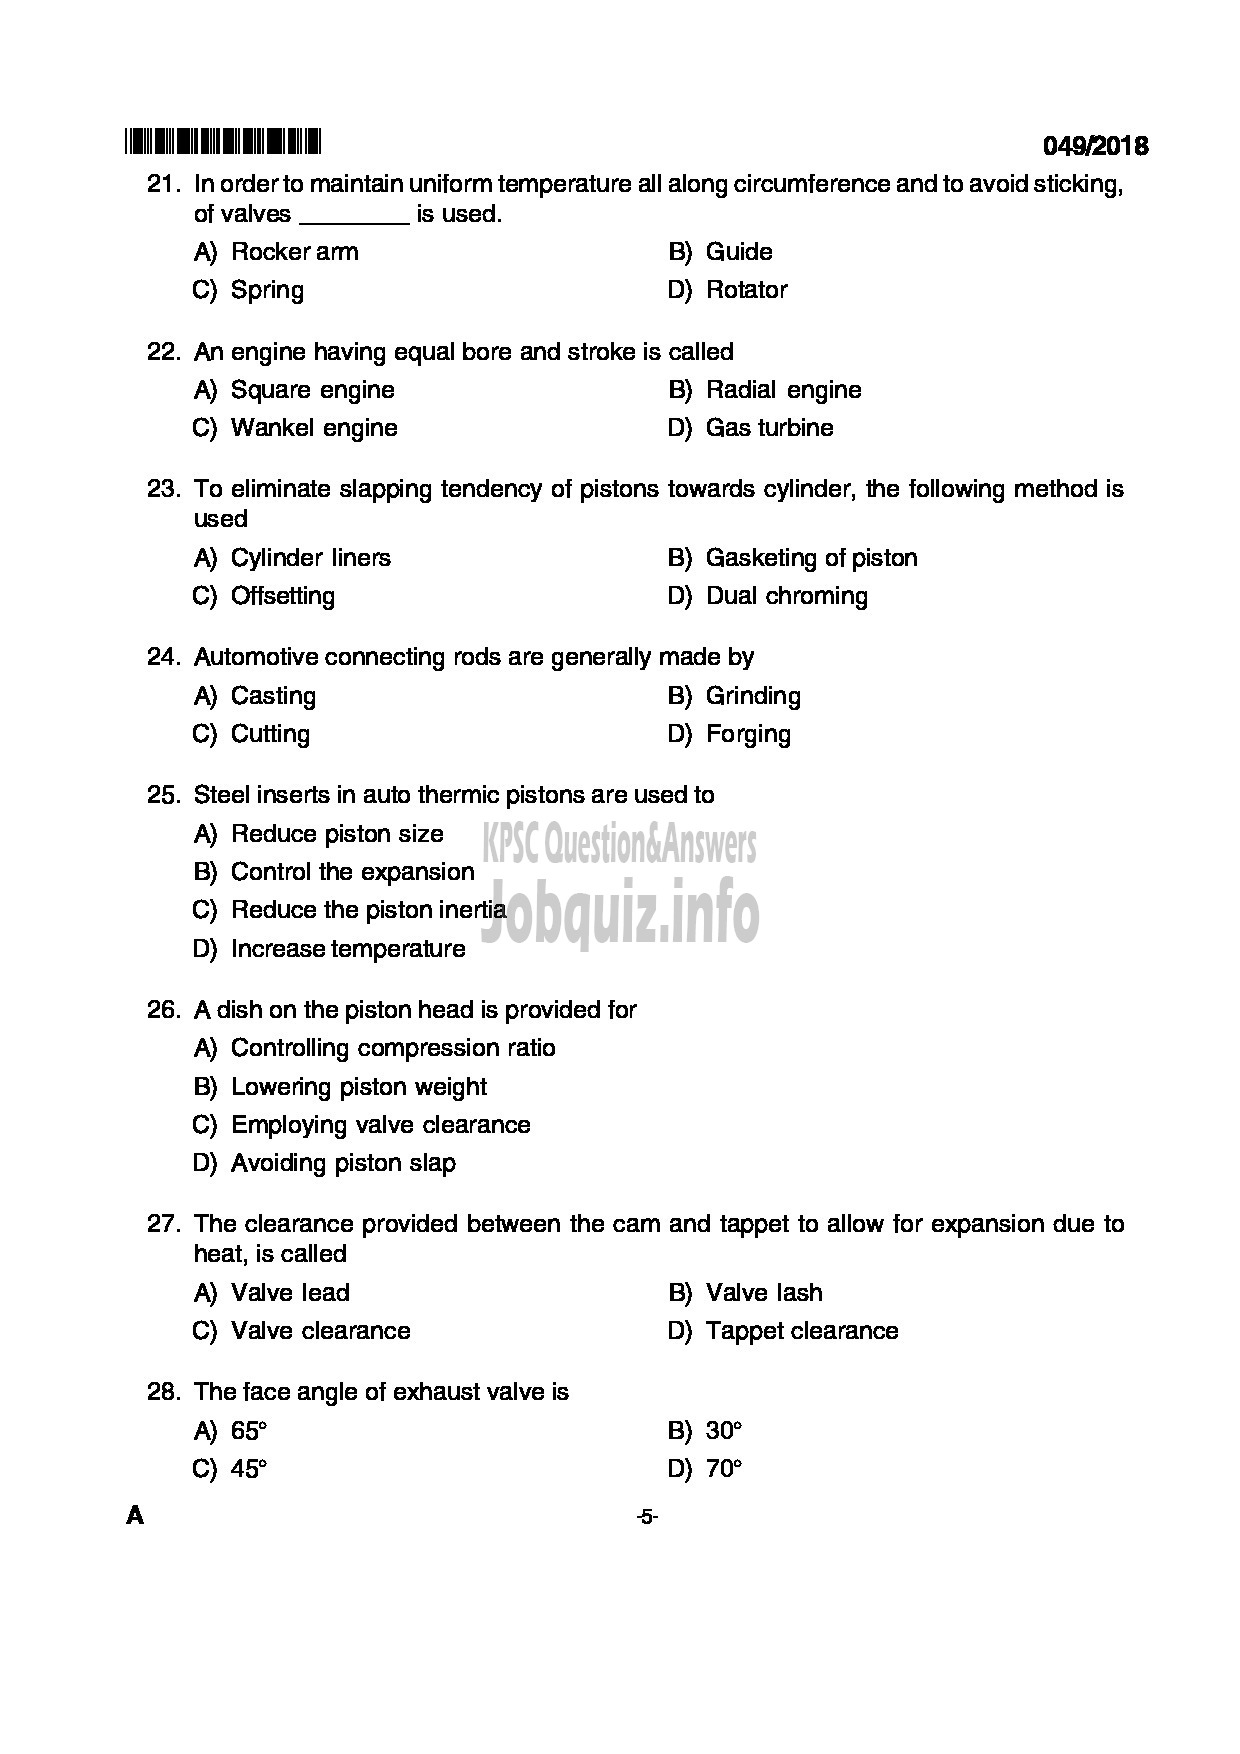 Kerala PSC Question Paper - VOCATIONAL INSTRUCTOR IN MAINTENANCE AND REPAIRS OF AUTOMOBILES VOCATIONAL HIGHER SECONDARY EDUCATION-5